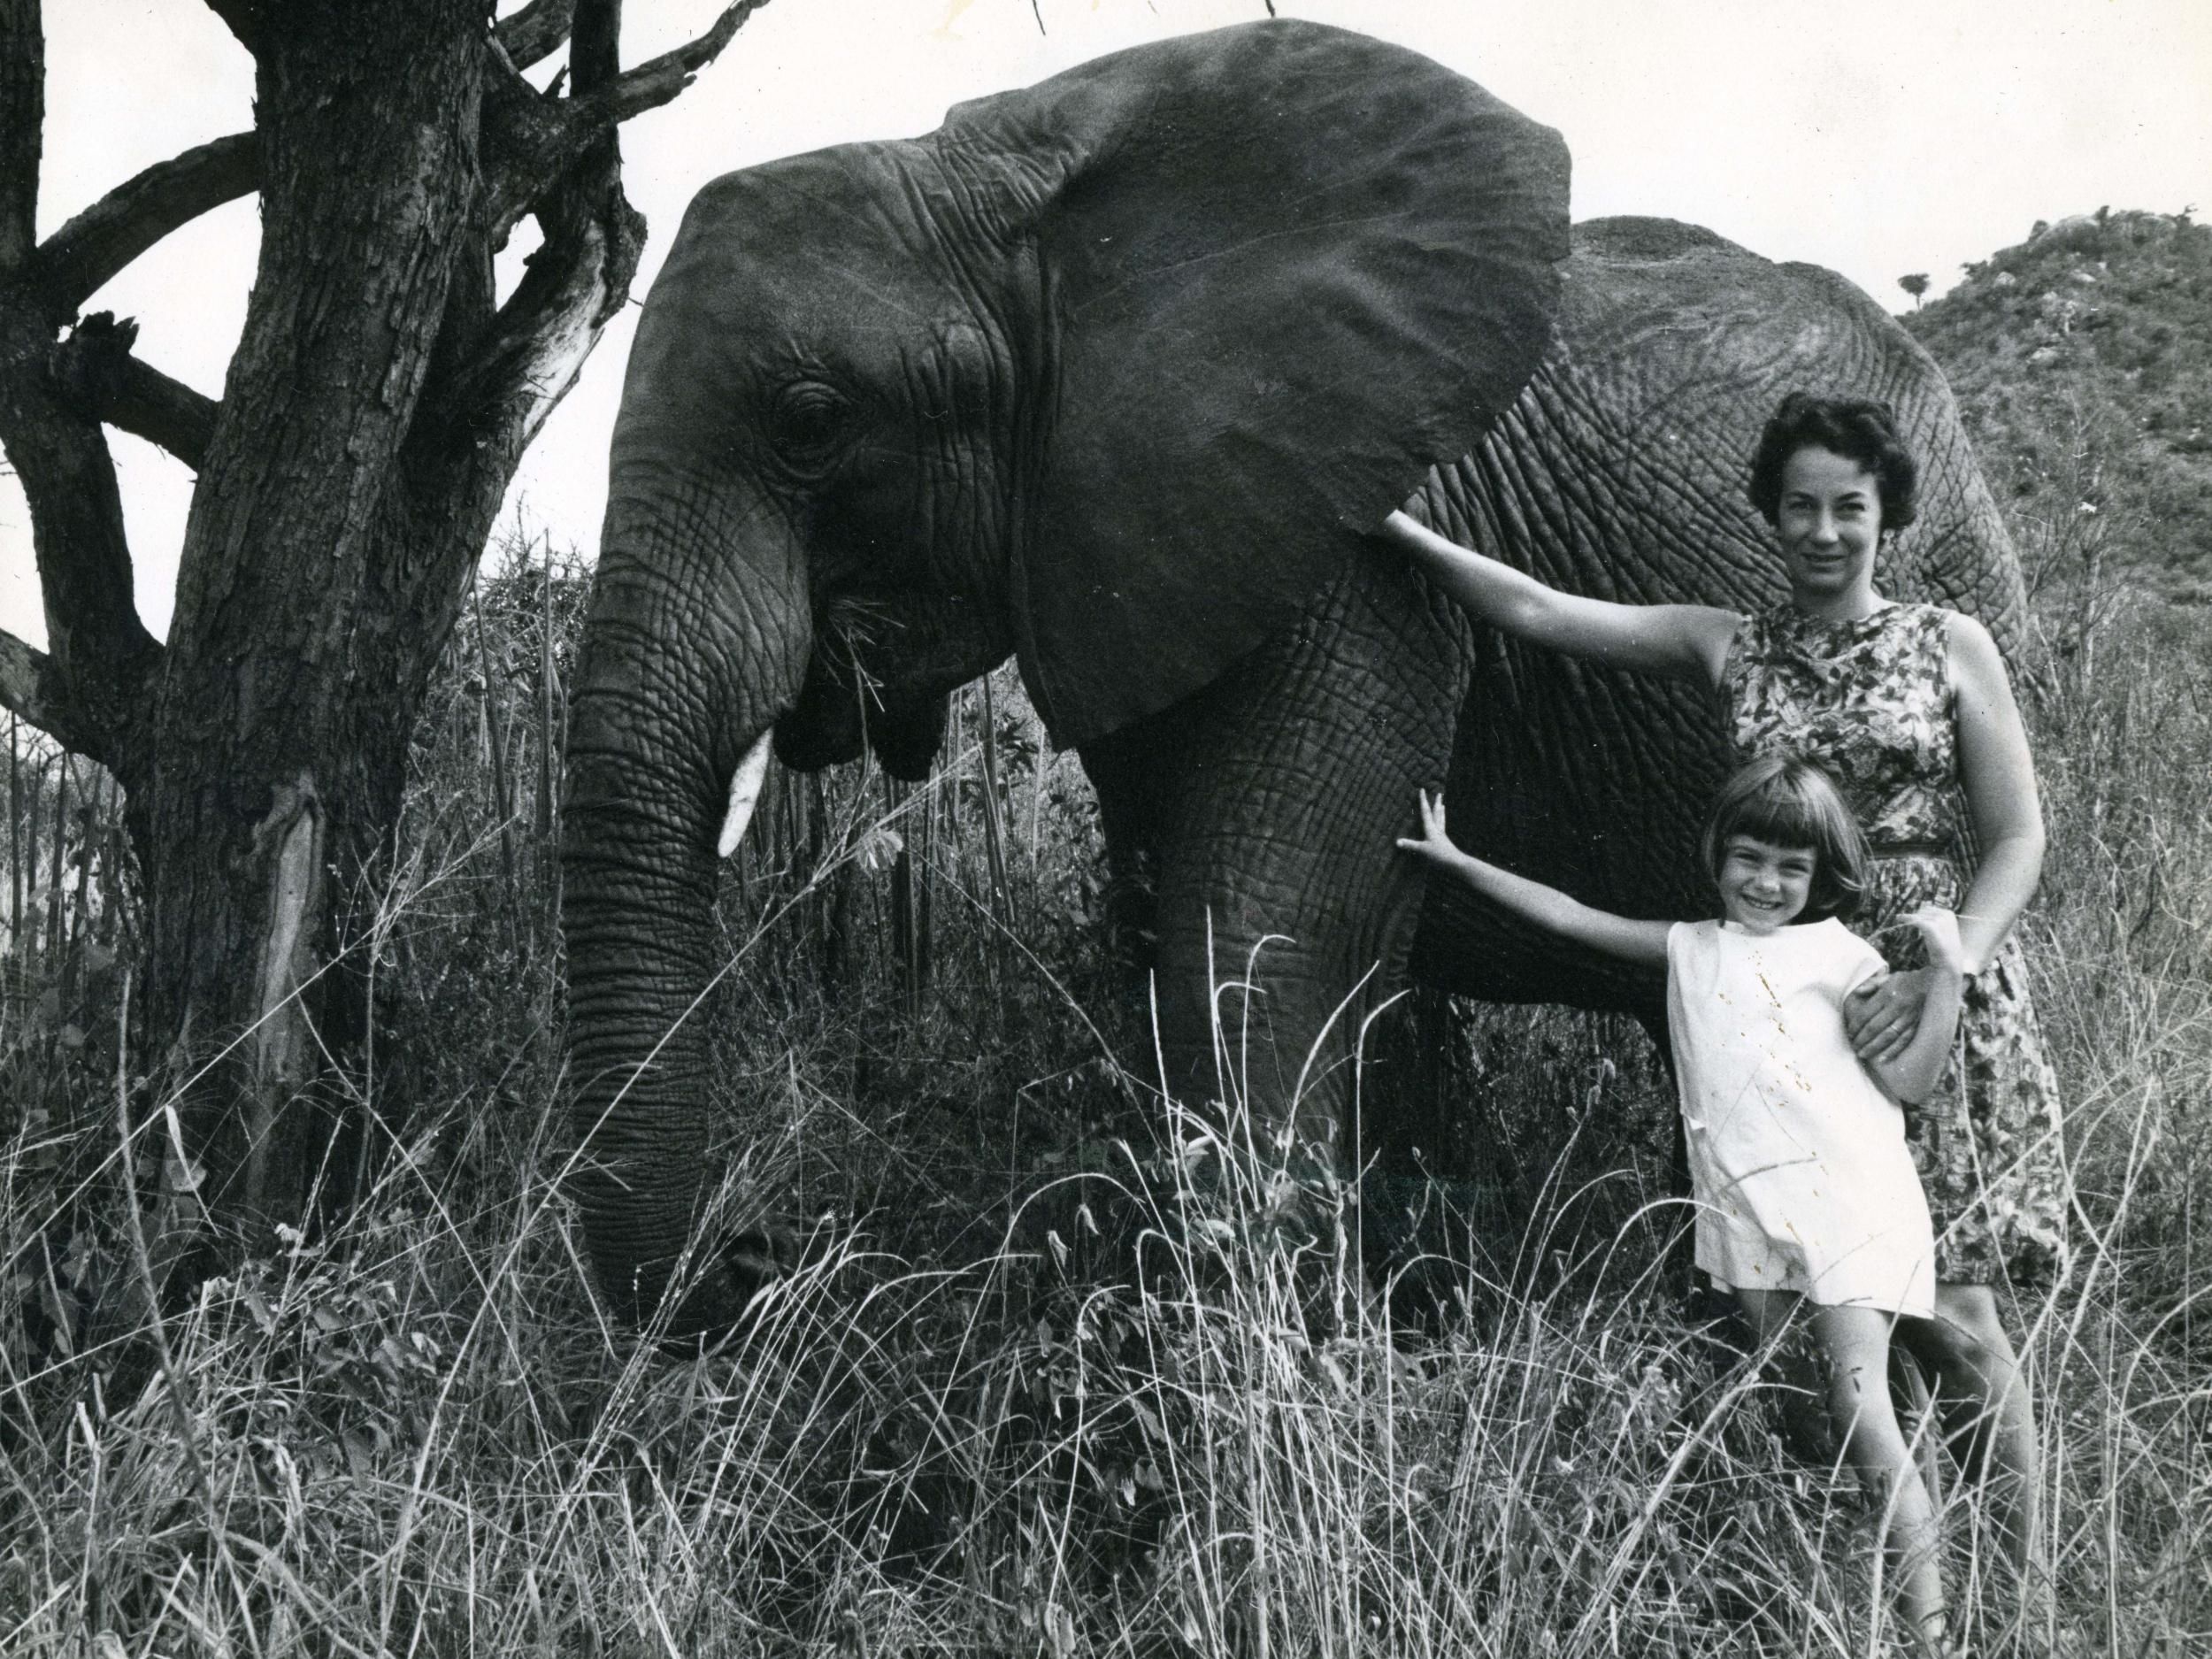 The conservationist spent most of her life forging an unforgiving landscape into a protected space for the country’s biggest elephant population